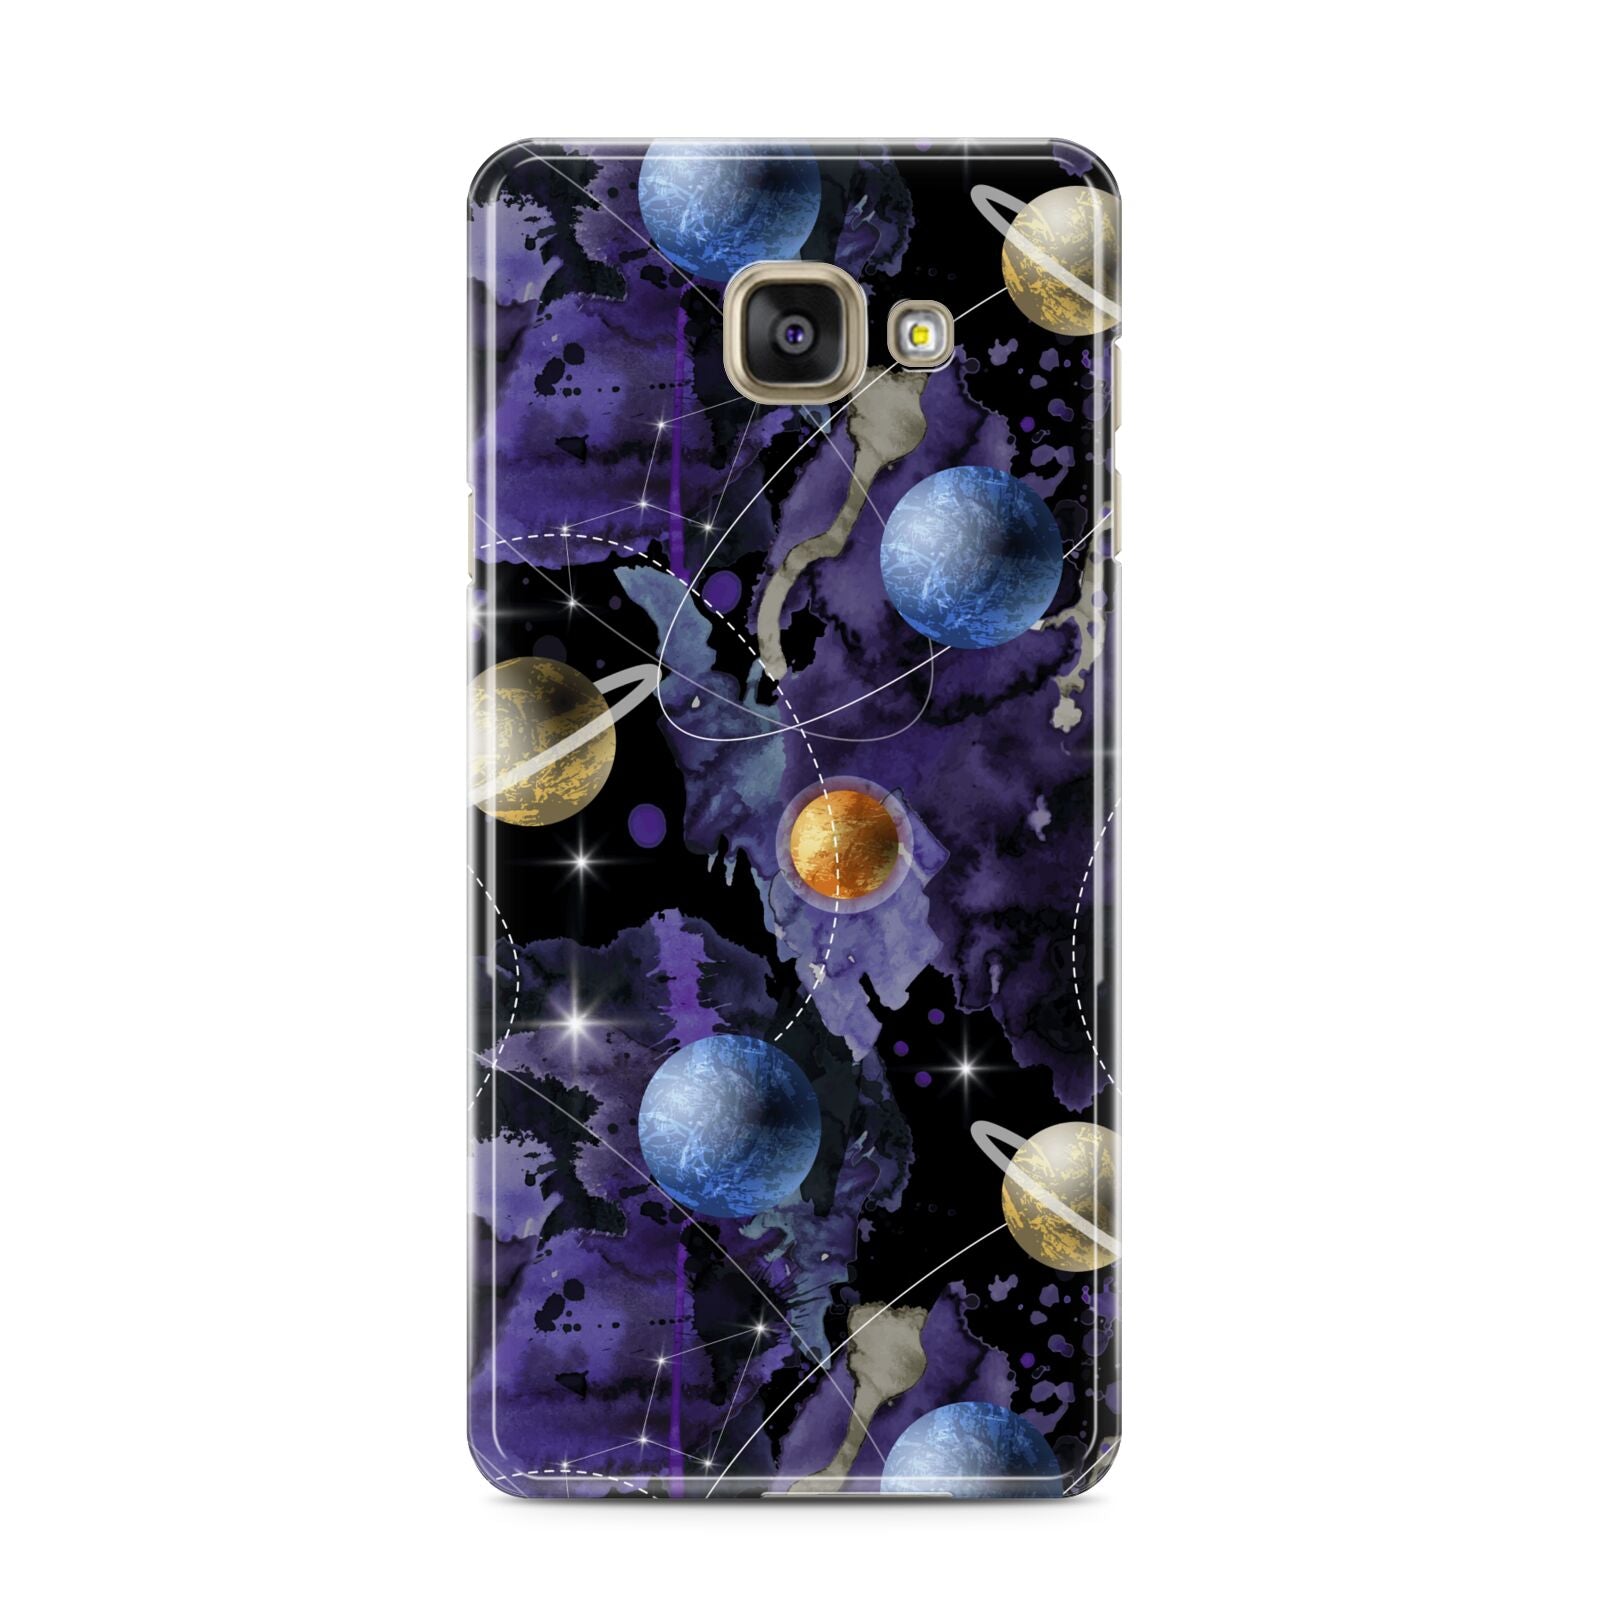 Planet Samsung Galaxy A3 2016 Case on gold phone